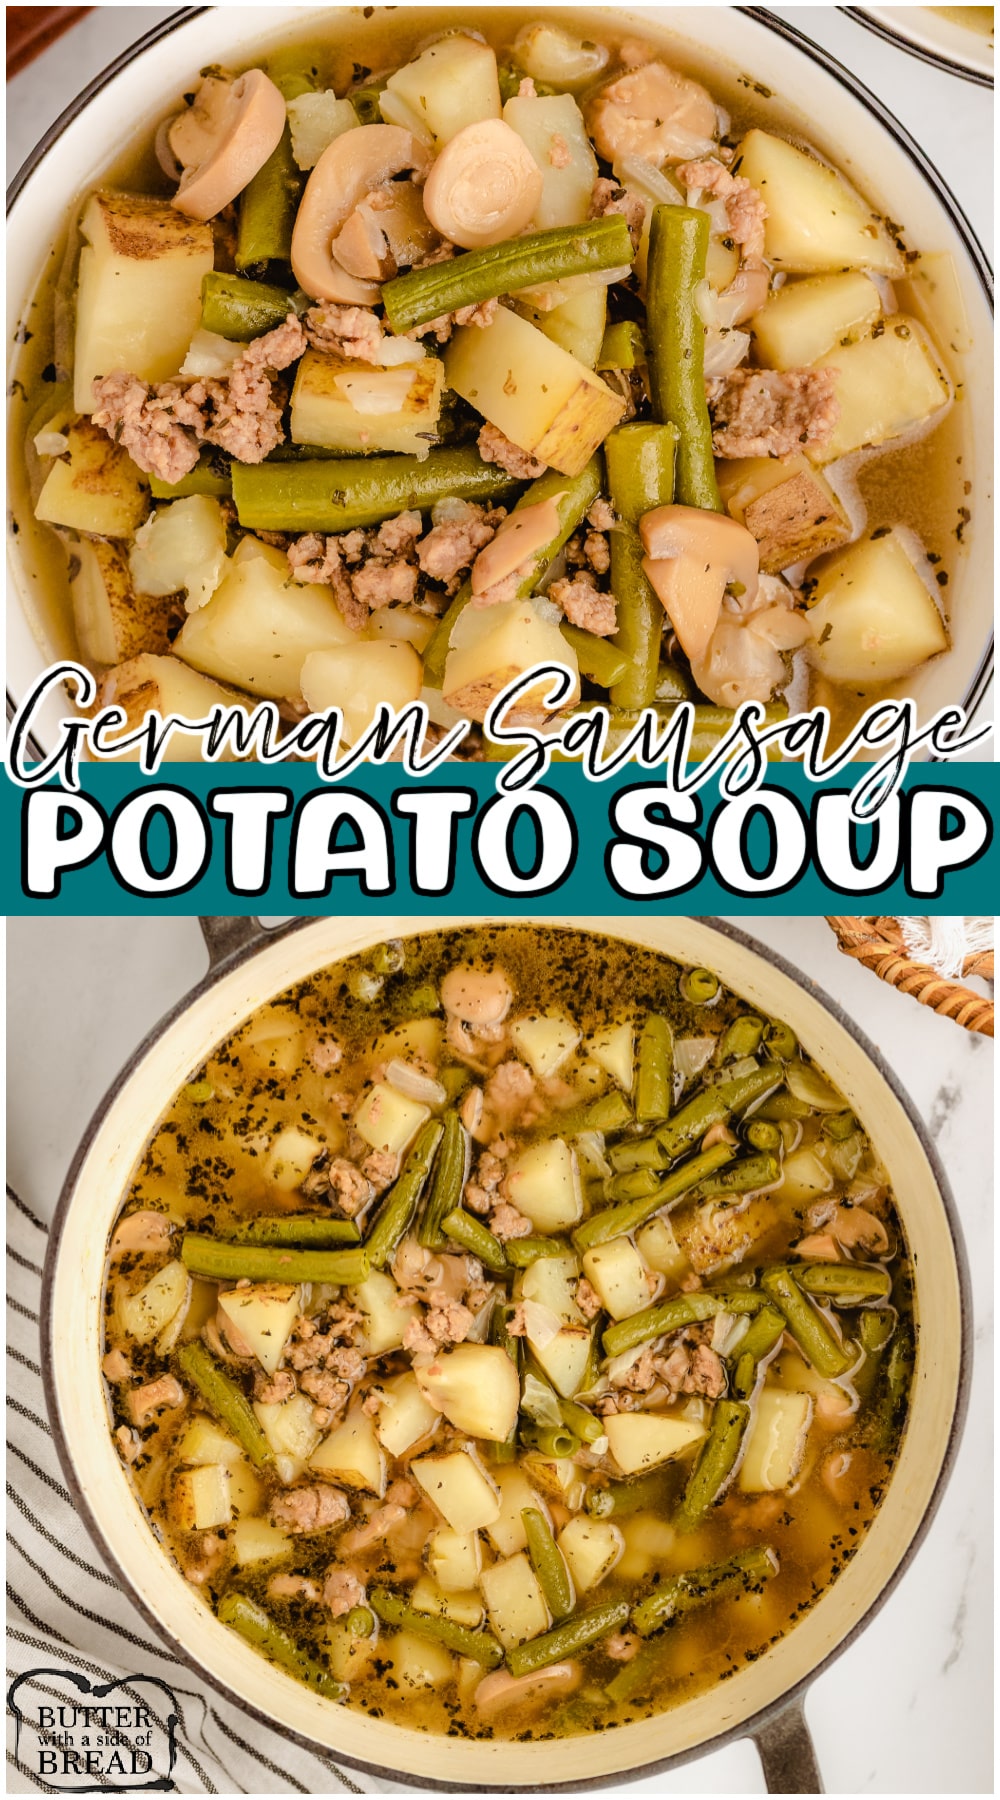 German sausage soup packed with flavorful sausage, potatoes & green beans, for a comforting dinner your family will love! Easy homemade weeknight dinner made on the stove or in a crockpot!